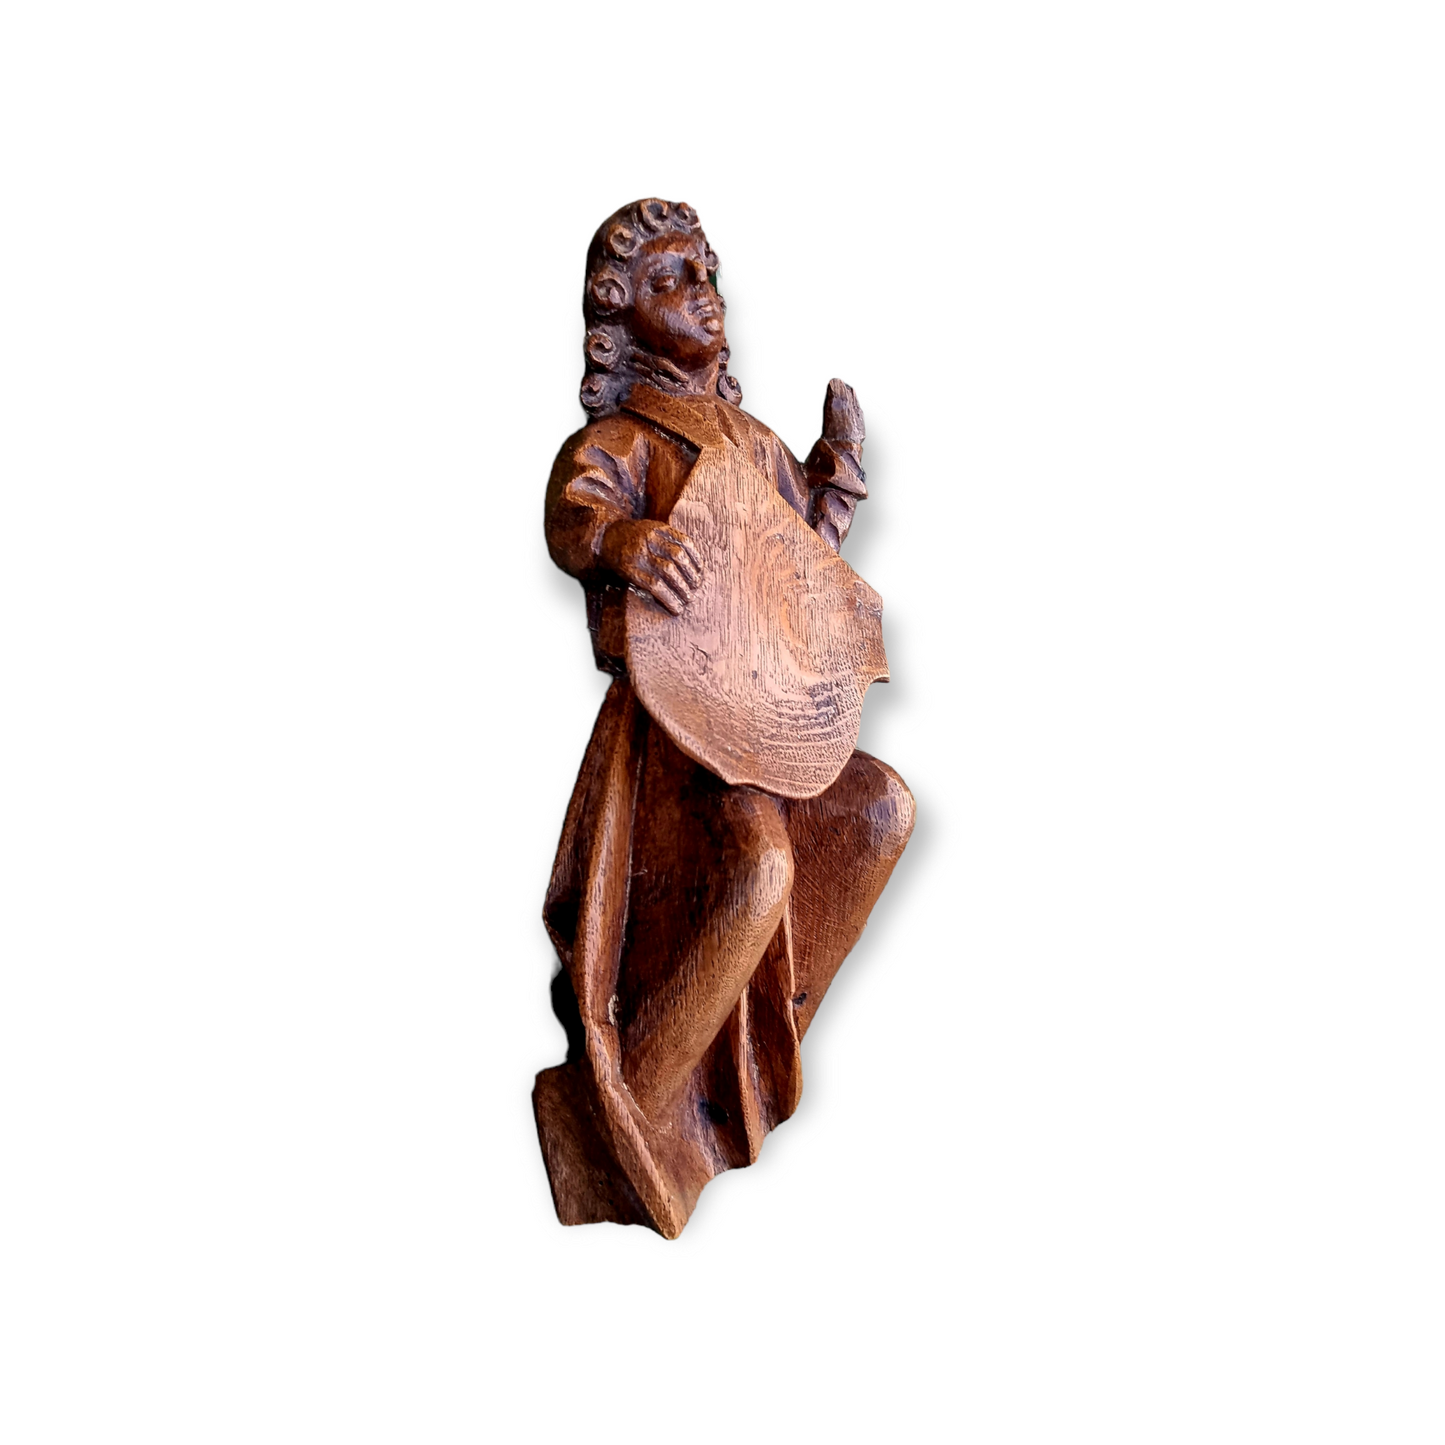 Early 16th Century Flemish Antique Carved Oak Figure / Sculpture Of An Angel Bearing a Shield